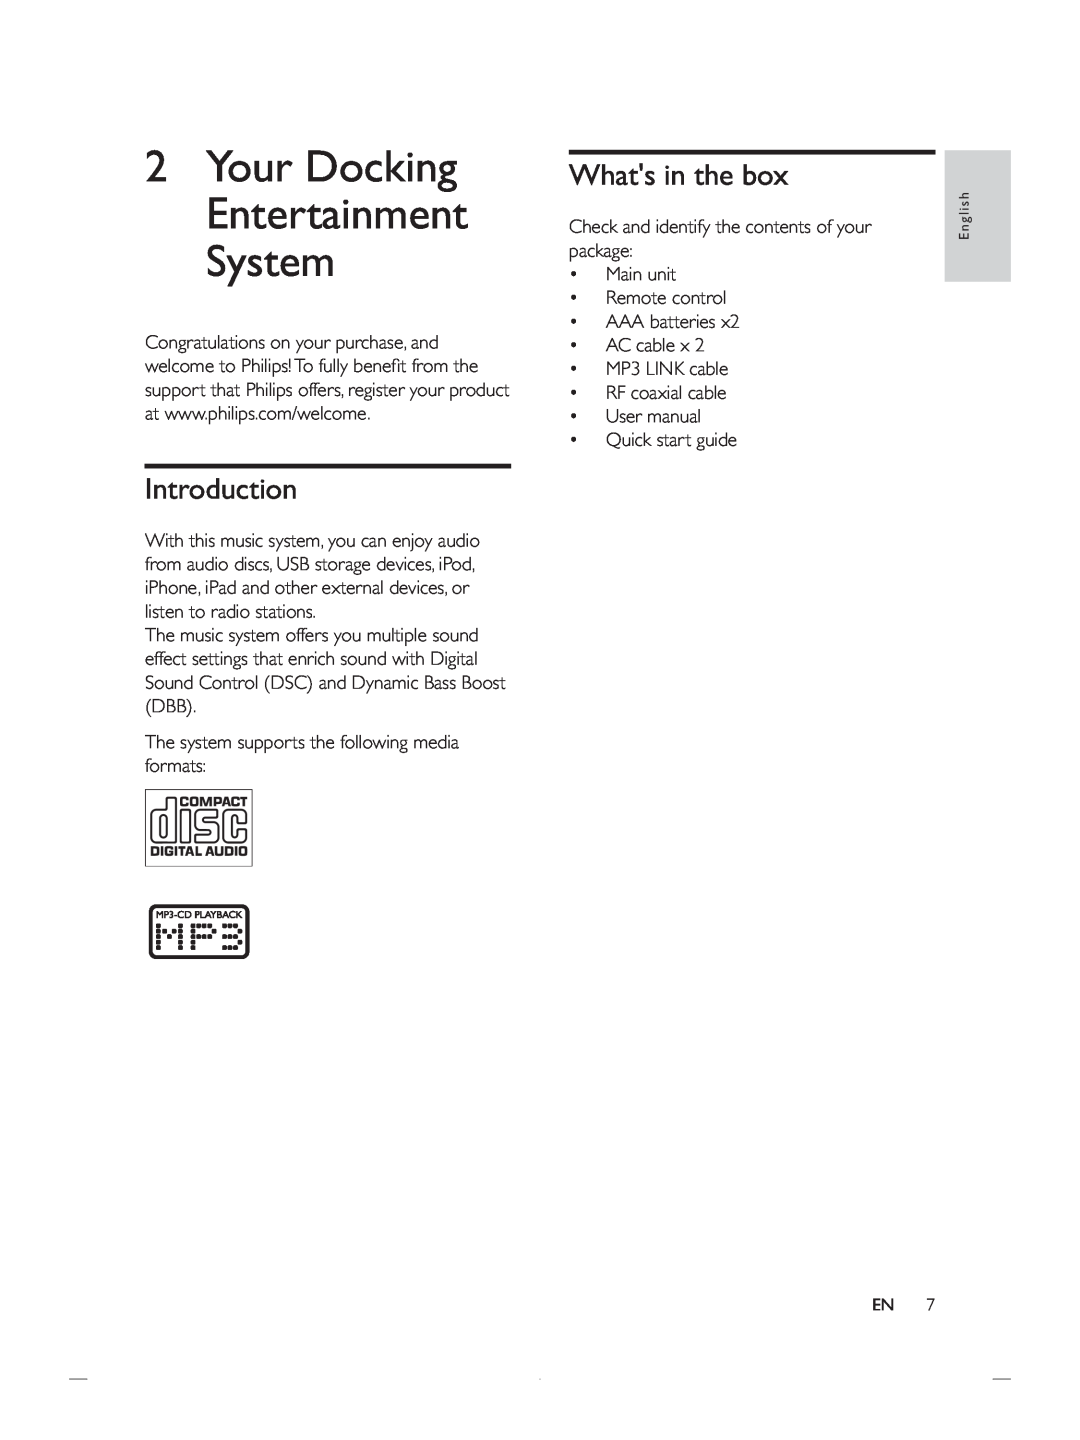 Philips DCB852 user manual Introduction, Whats in the box, Your Docking Entertainment System 